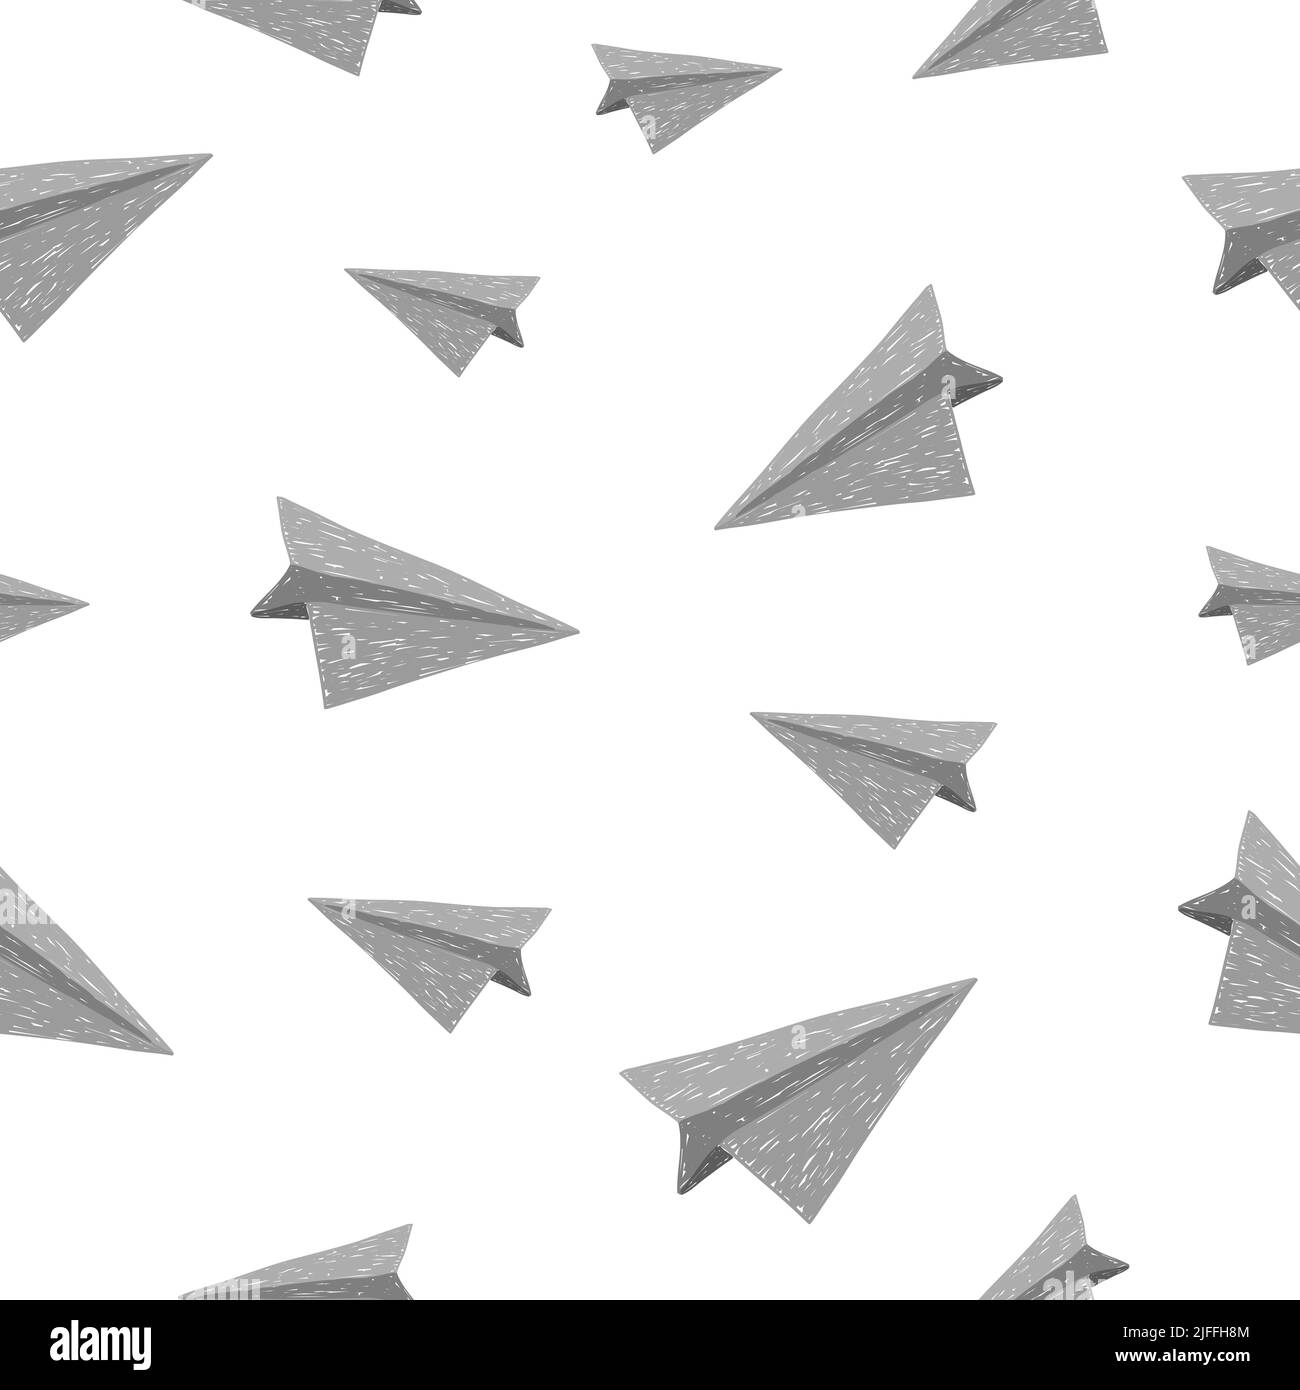 Seamless hand drawn paper planes pattern. Vector doodle illustration. Stock Vector